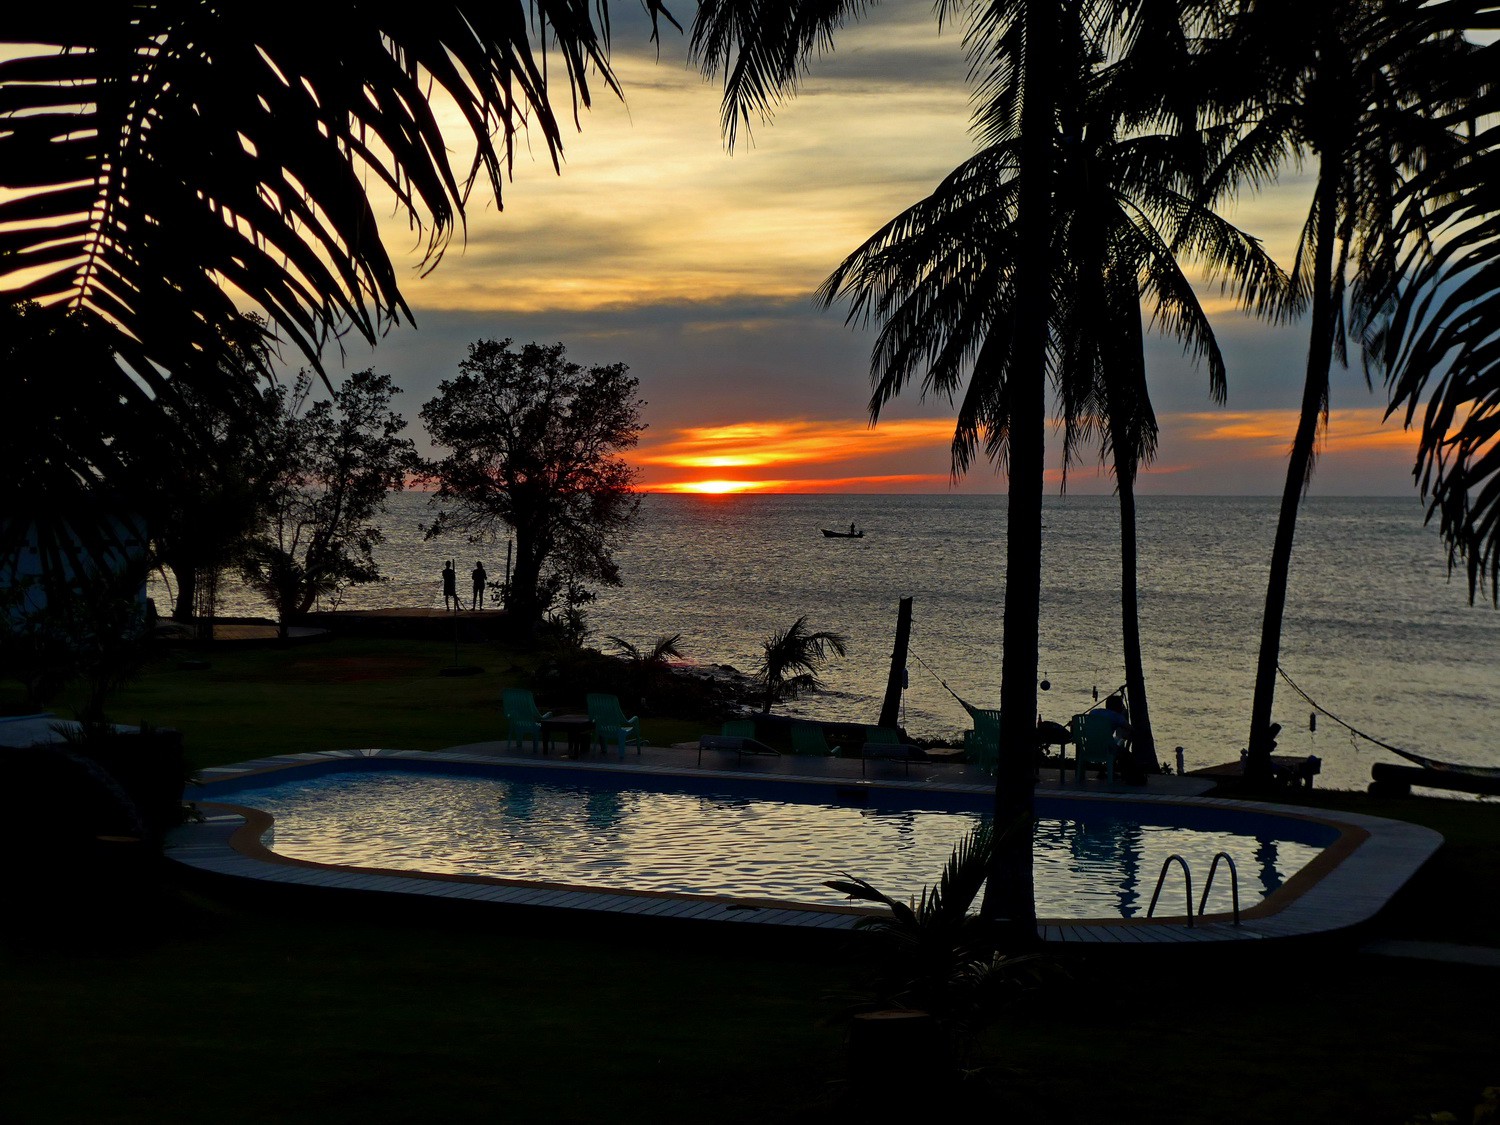 Sunset seen from our hostel The Elephant Bayresort in Bailan Beach